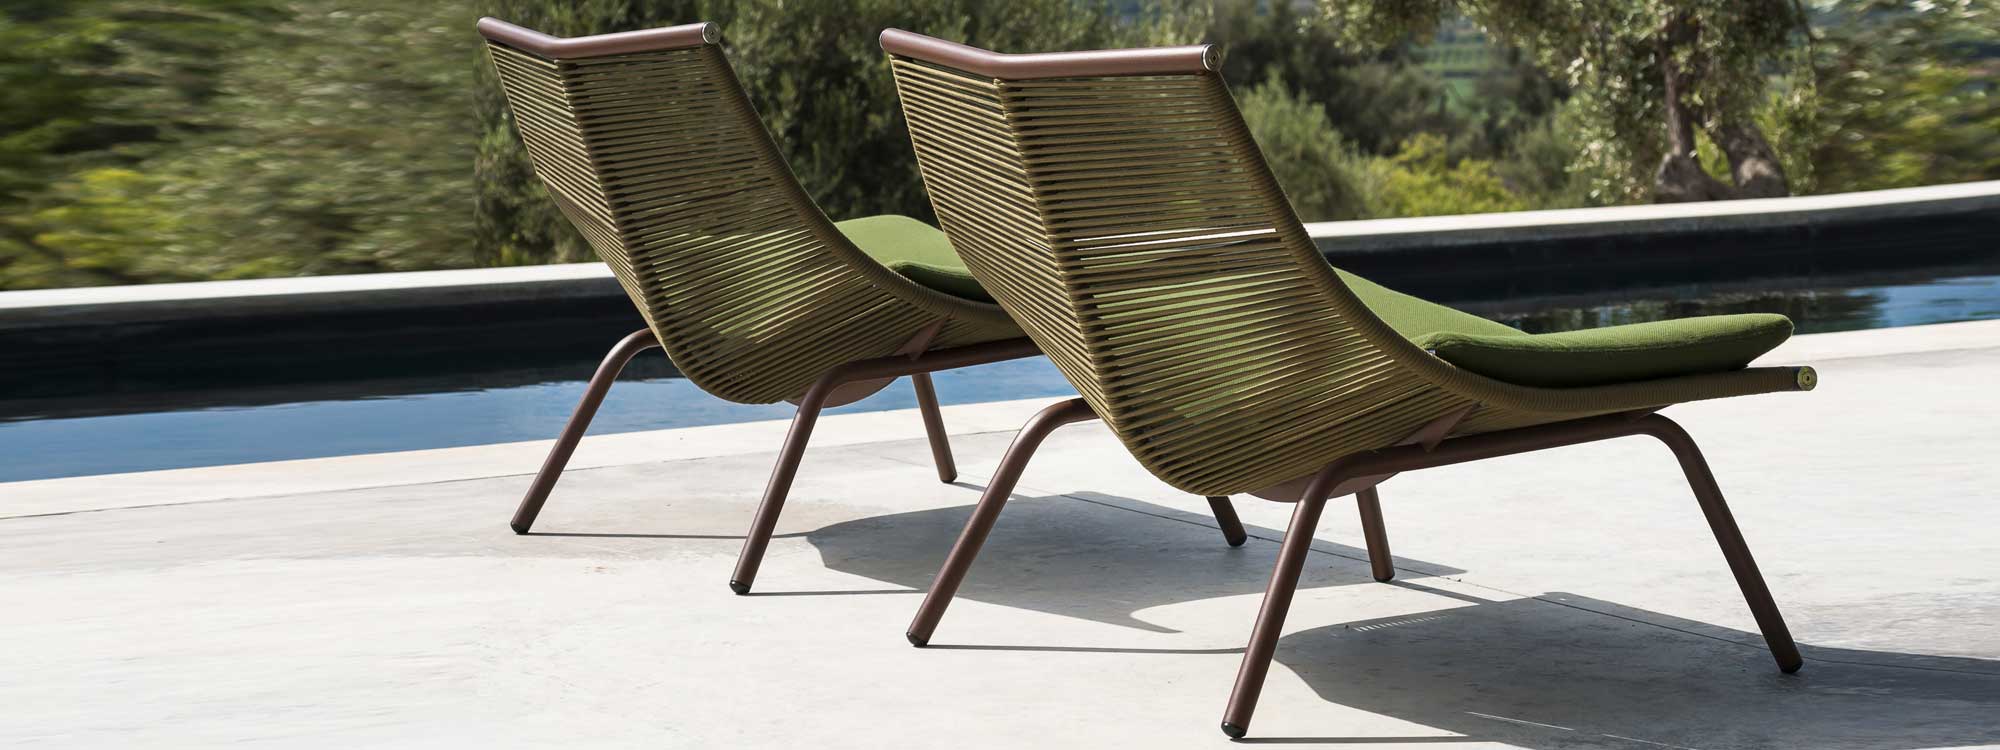 Pair of Laze modern garden chairs by swimming pool